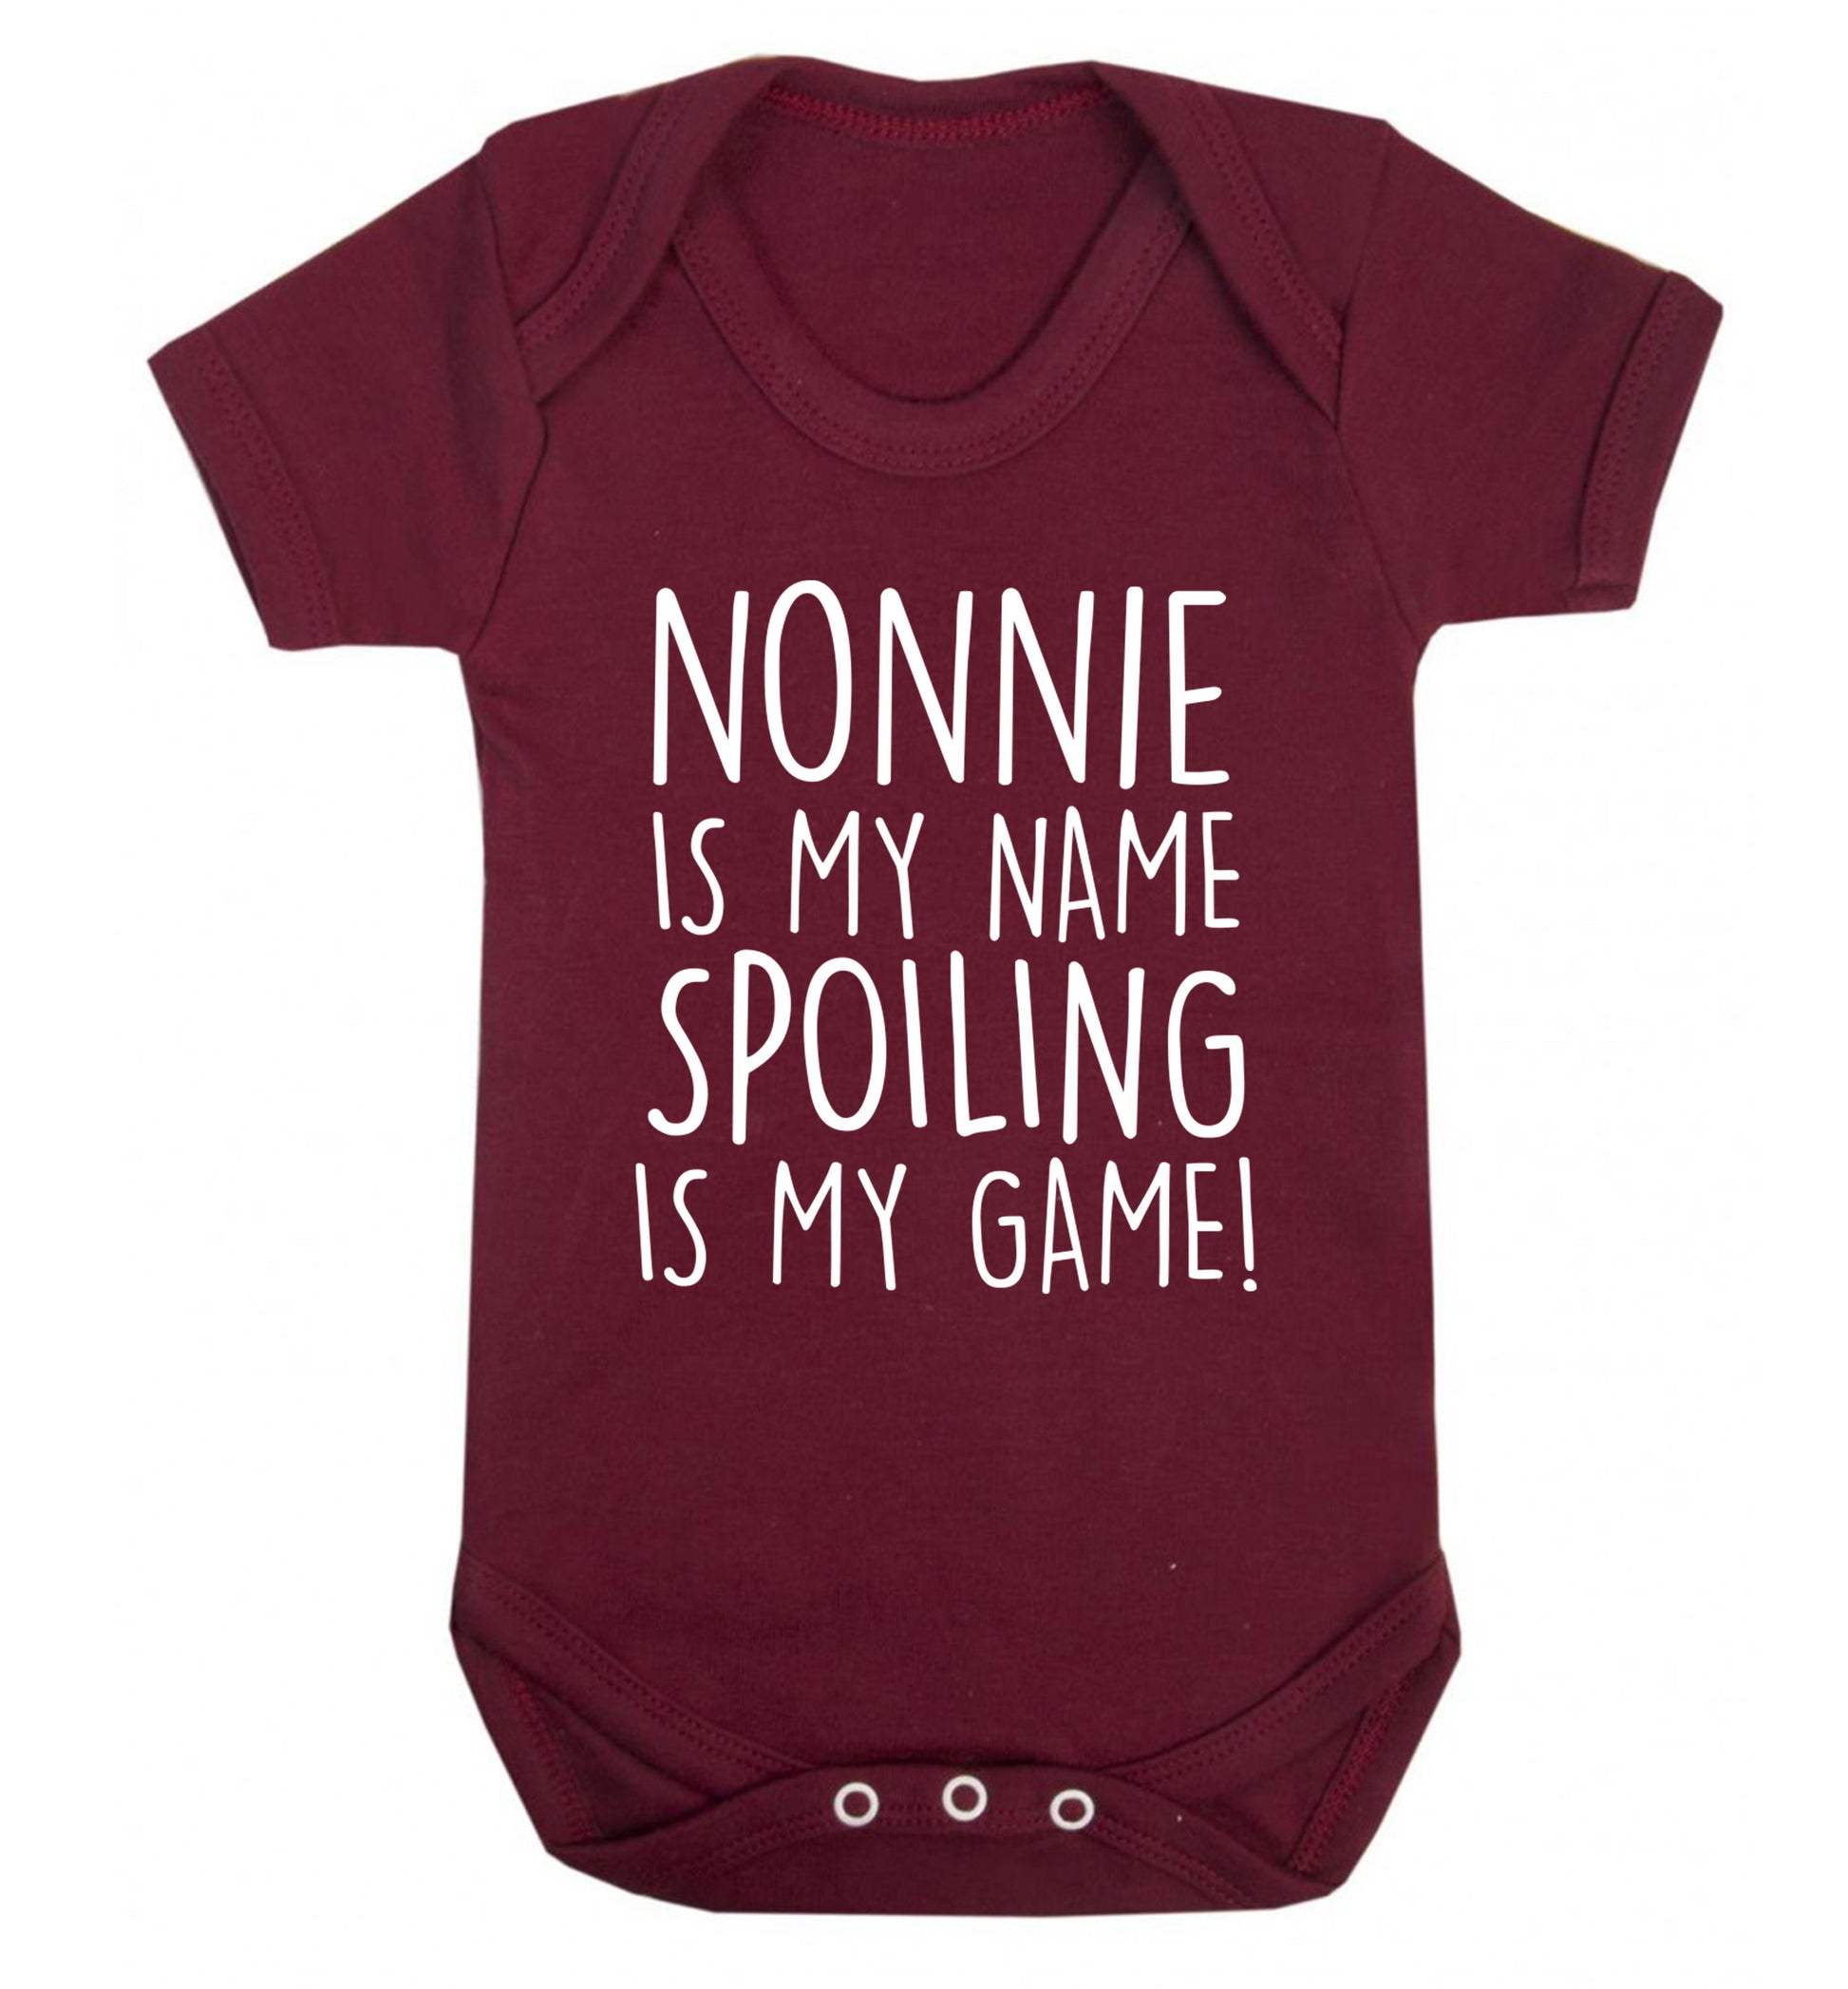 Nonnie is my name, spoiling is my game Baby Vest maroon 18-24 months